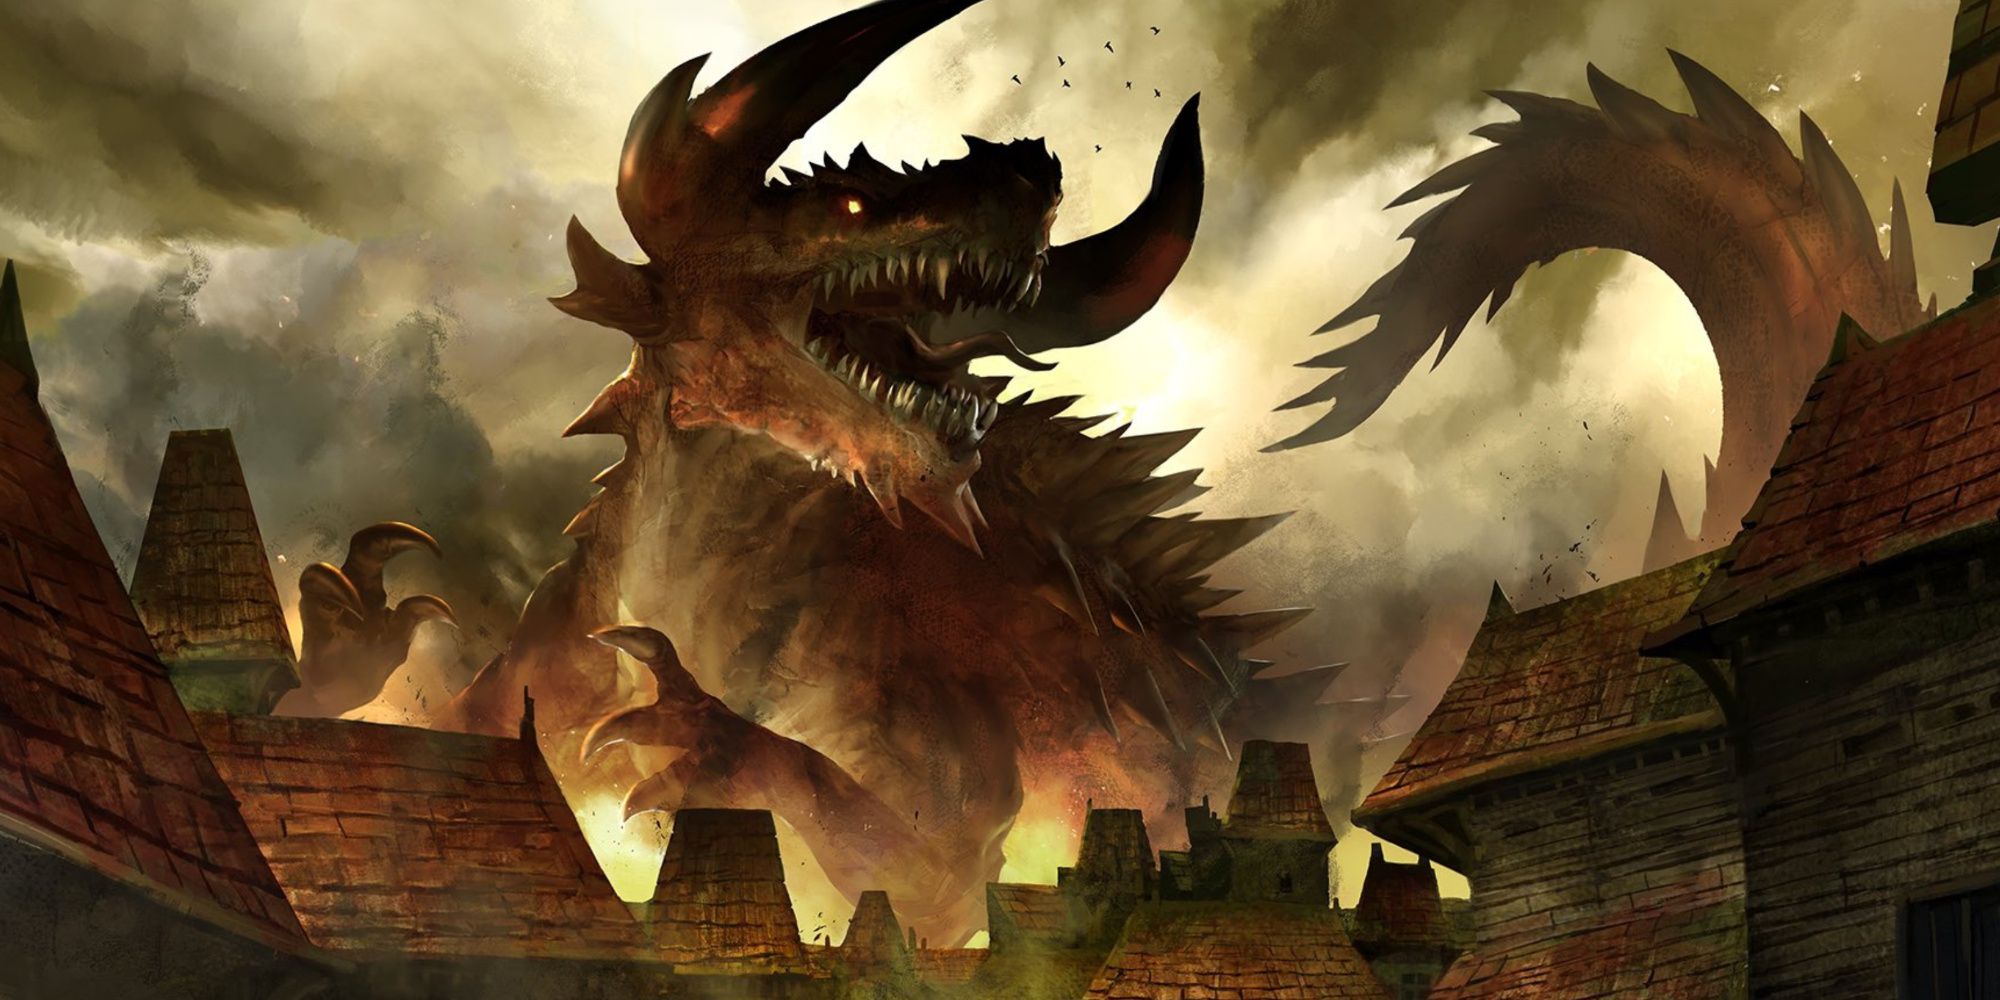 You Look Upon the Tarrasque by Kekai Kotaki Tarrasque destroying a town while fire and smoke rages around it